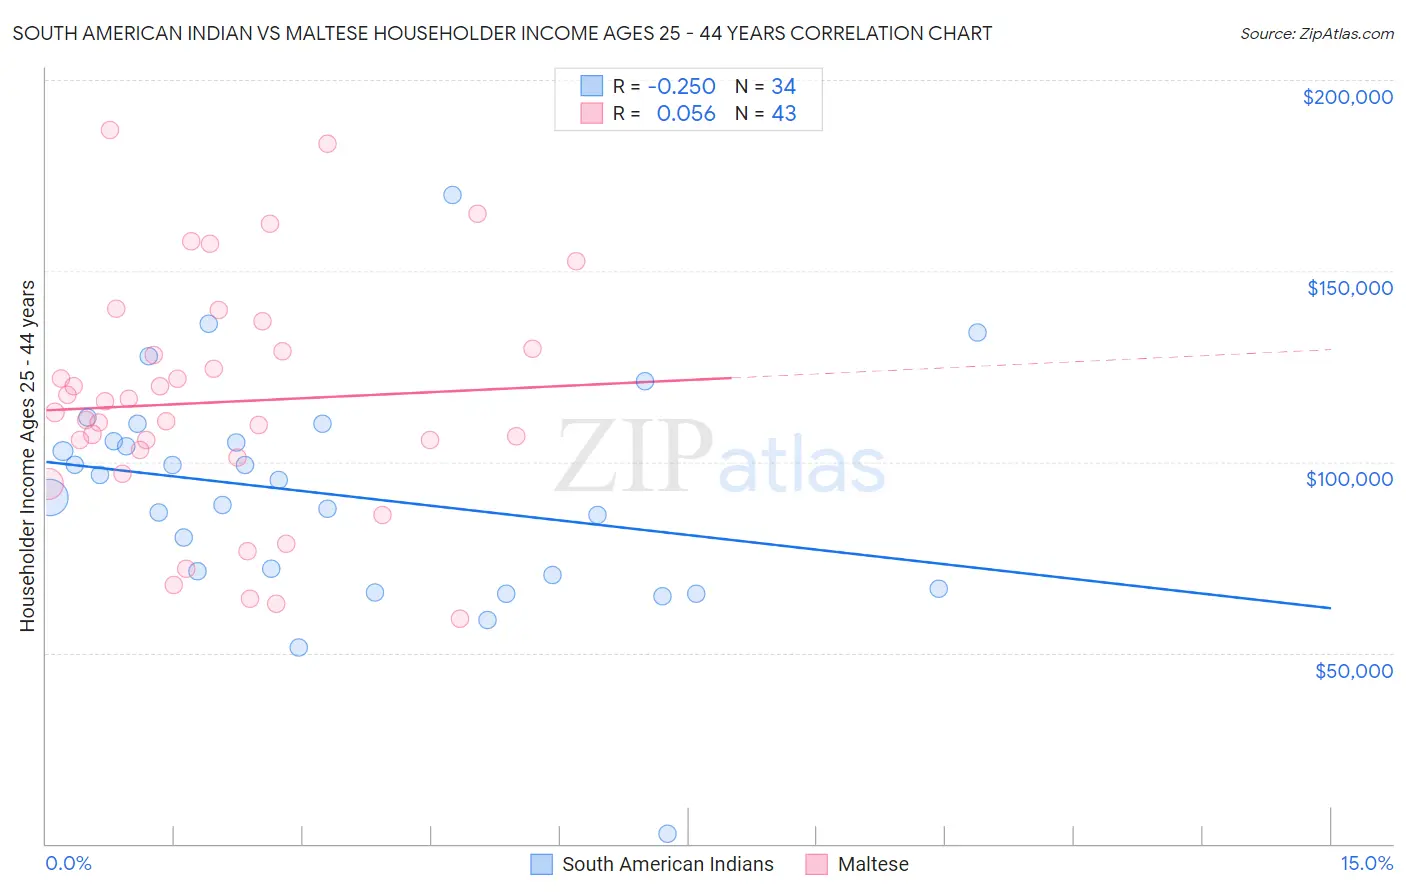 South American Indian vs Maltese Householder Income Ages 25 - 44 years